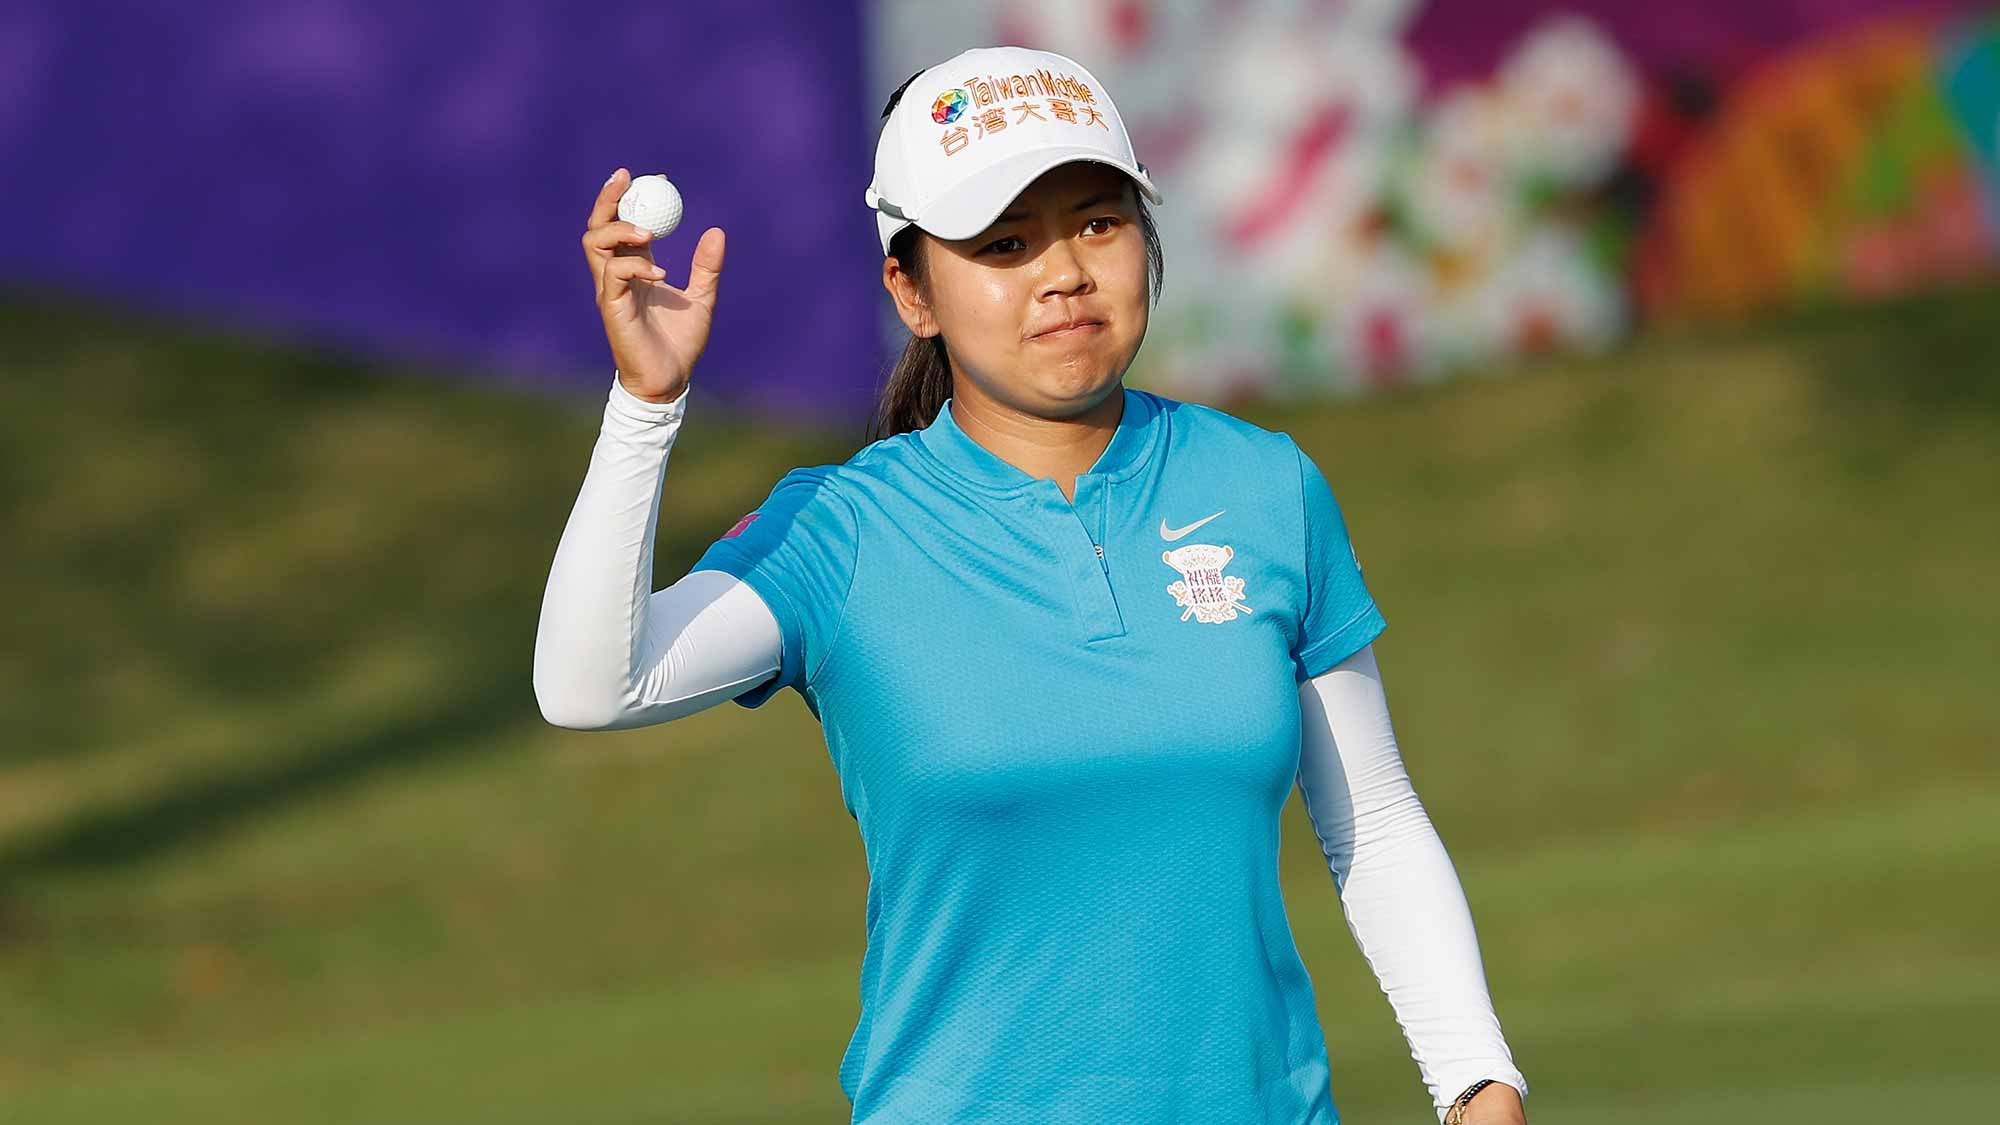 Wei-Ling Hsu of Chinese Taipei acknowledges to spectators after her shot at eighteen hole during the second round of the Swinging Skirts LPGA Taiwan Championship at Ta Shee Golf & Country Club on October 26, 2018 in Taoyuan, Chinese Taipei